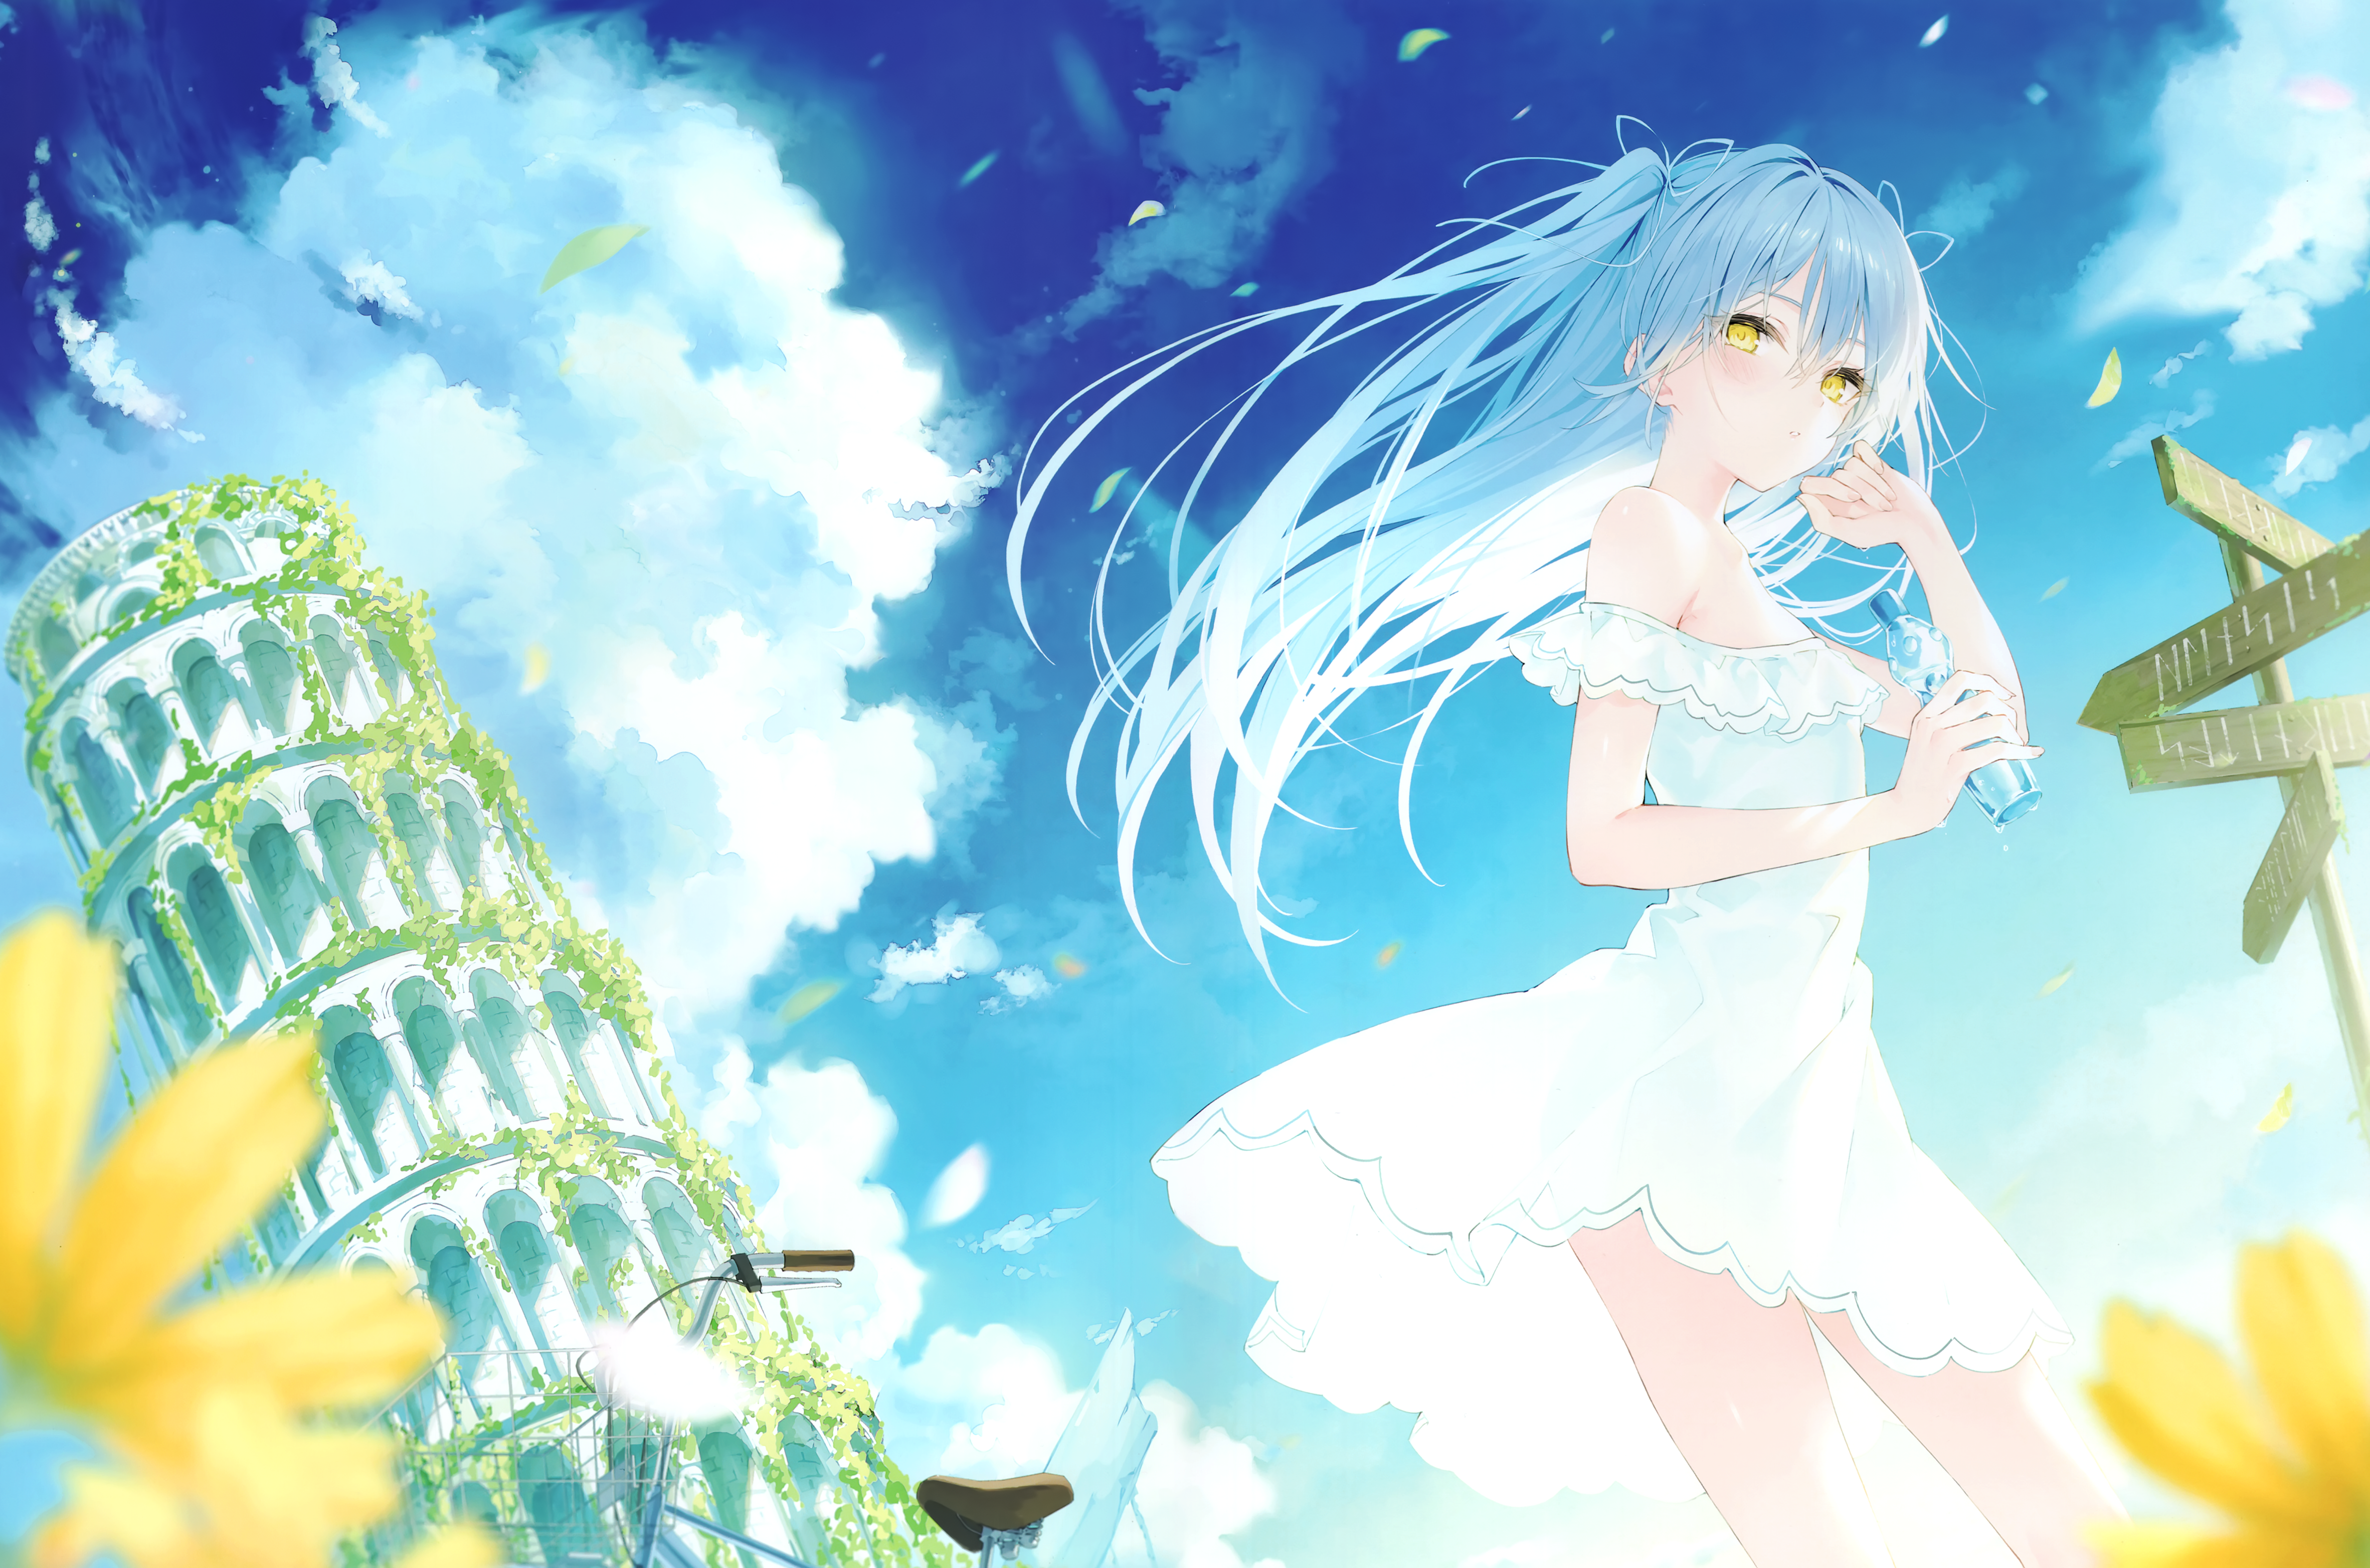 Anime Rurudo Anime Girls Clouds Long Hair Blue Hair Yellow Eyes Drink Flowers Petals Sky Looking At  4753x3145